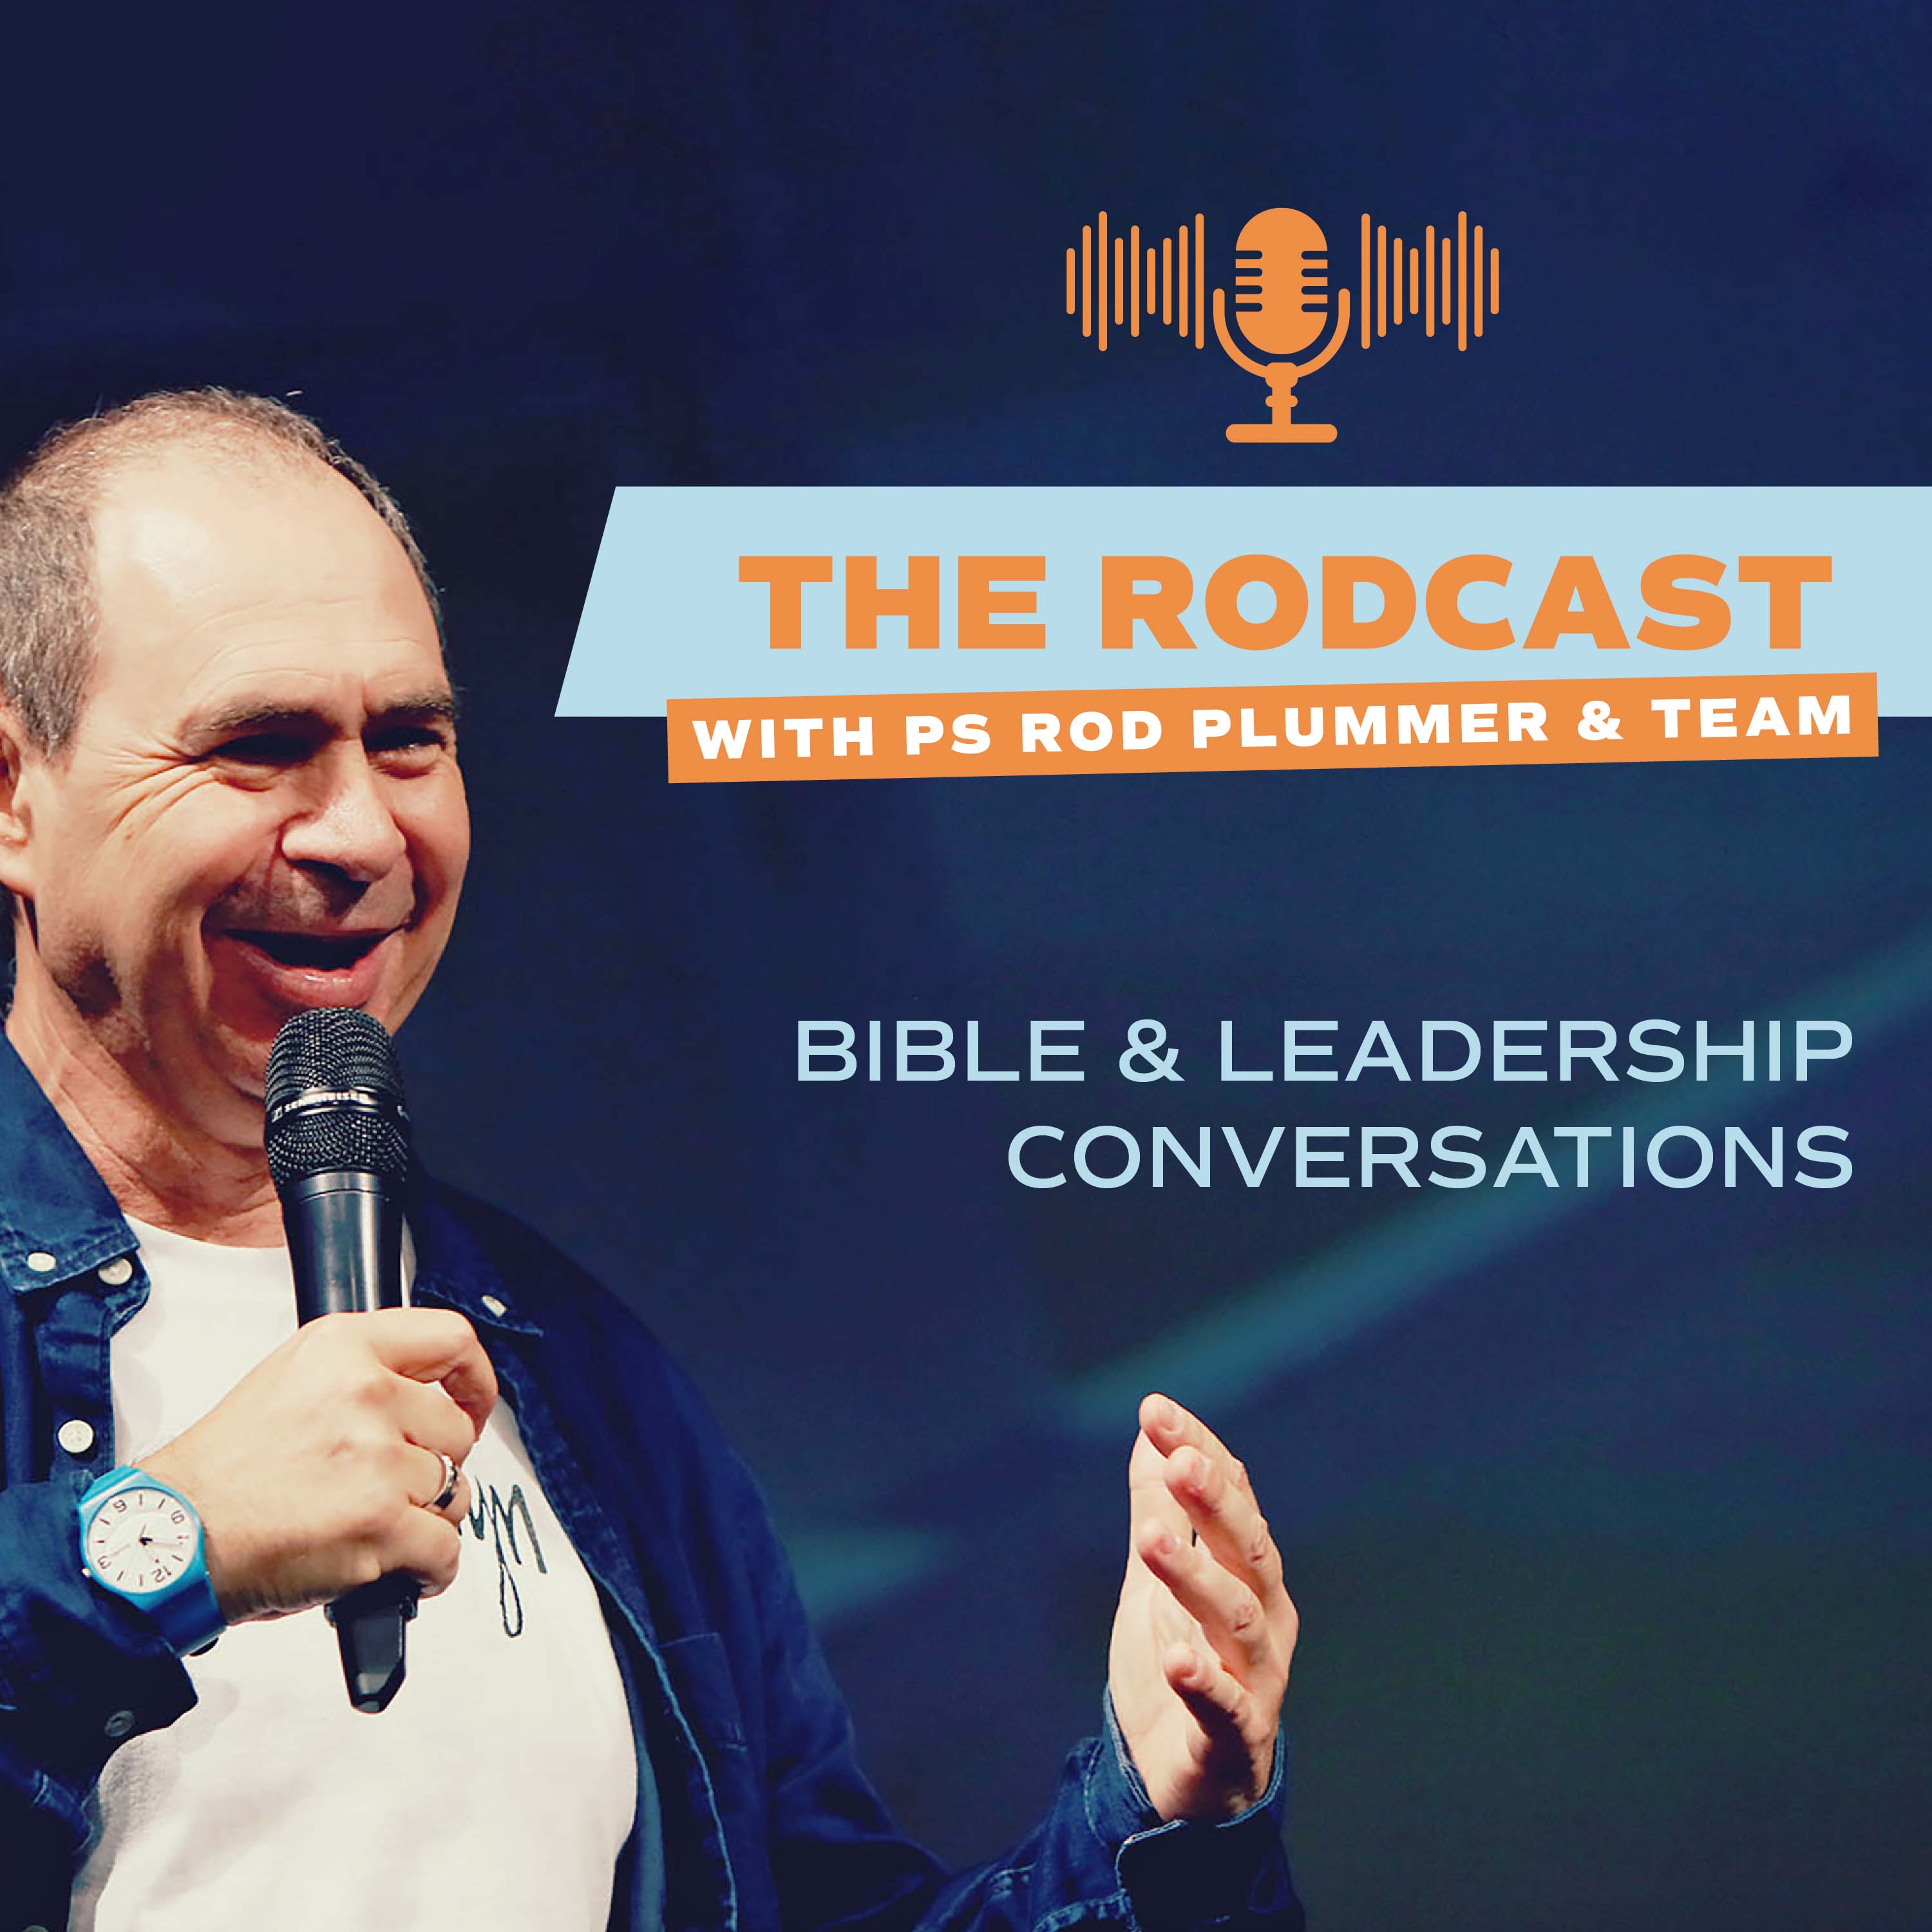 Artwork for The Rodcast, Bible & Leadership Conversations with Ps Rod Plummer and the Lifehouse Team